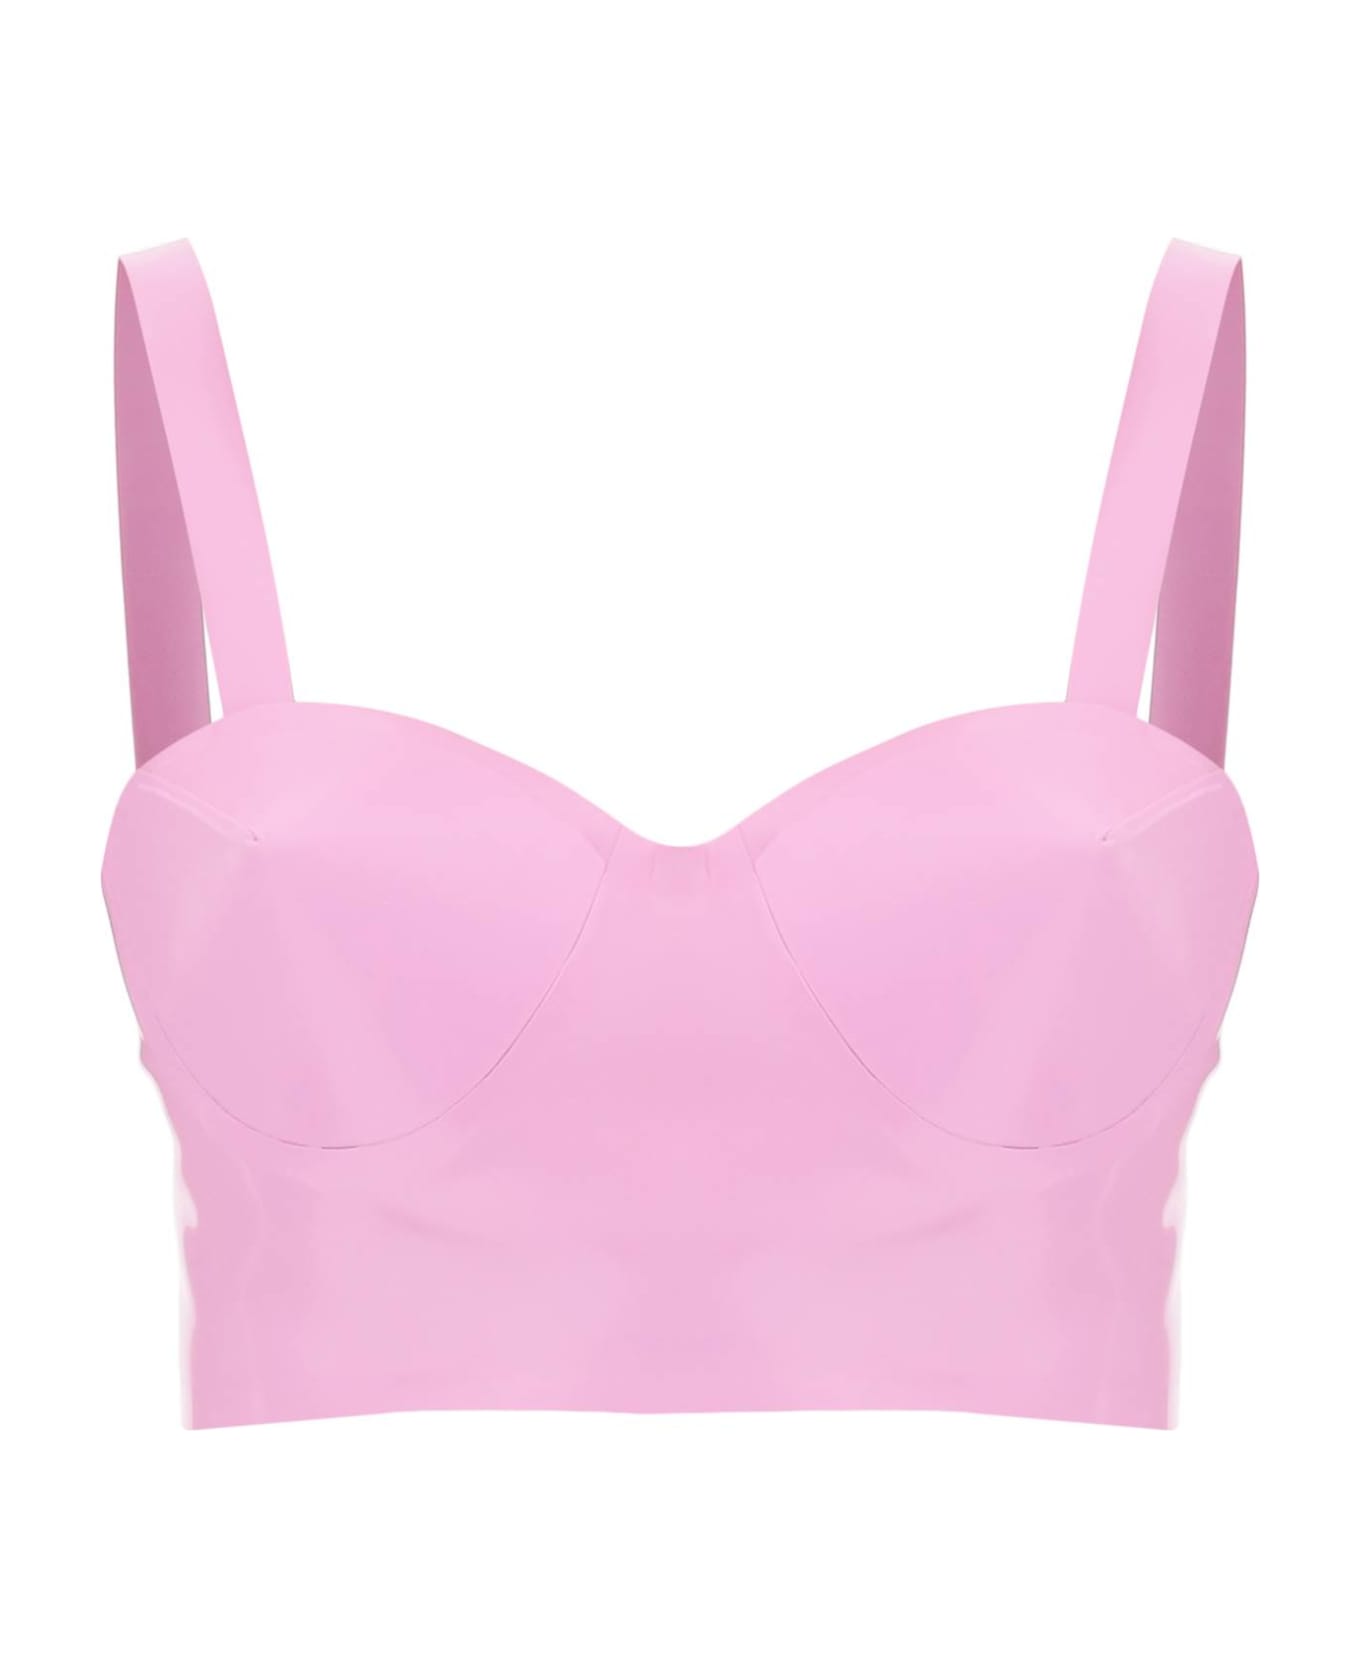 Maison Margiela Latex Top With Bullet Cups - LILAC (Pink)